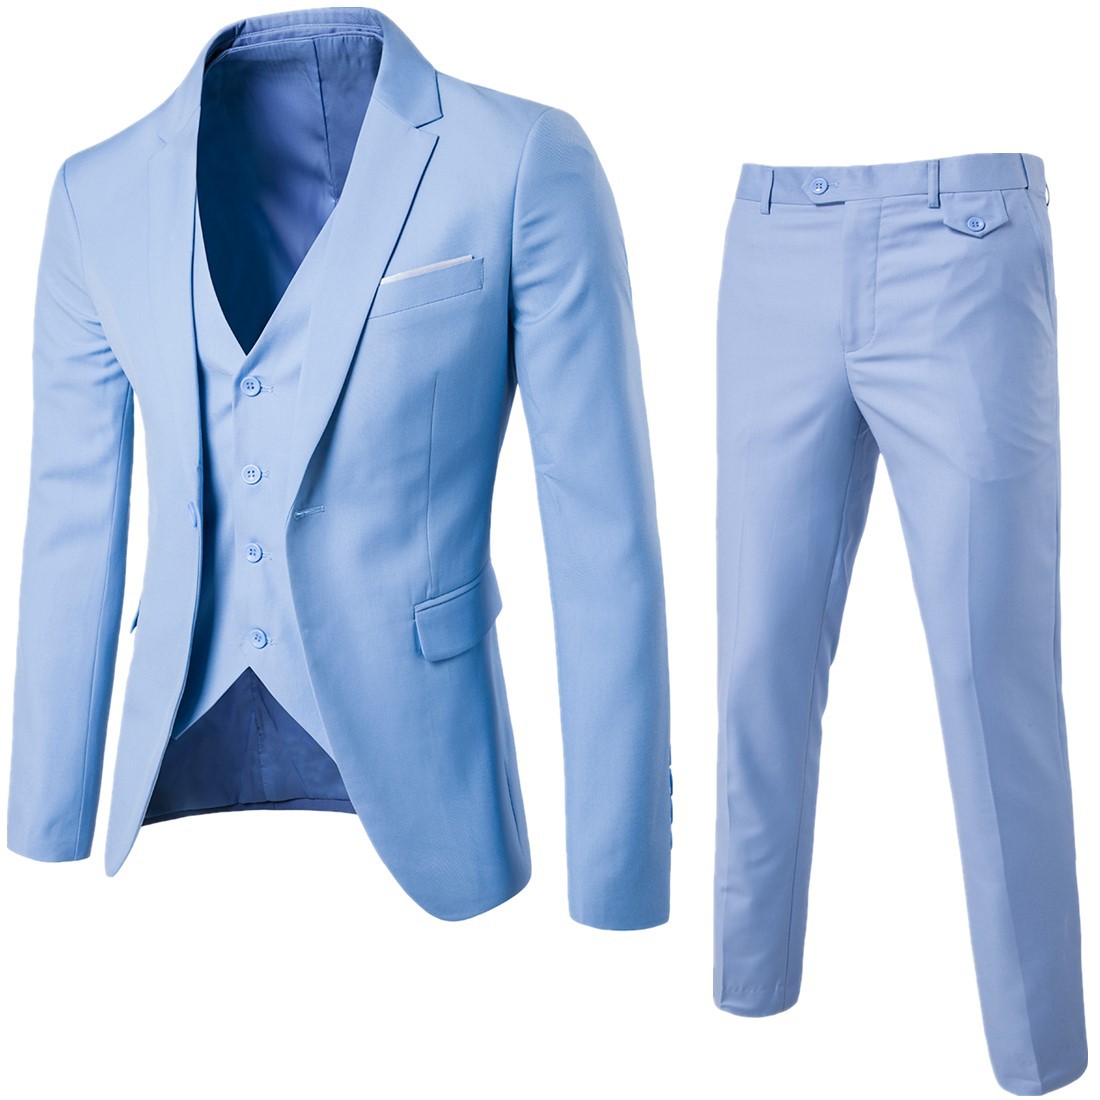 Spring and autumn new men's business and leisure suit three piece solid color large bridegroom best man Wedding Suit Dress